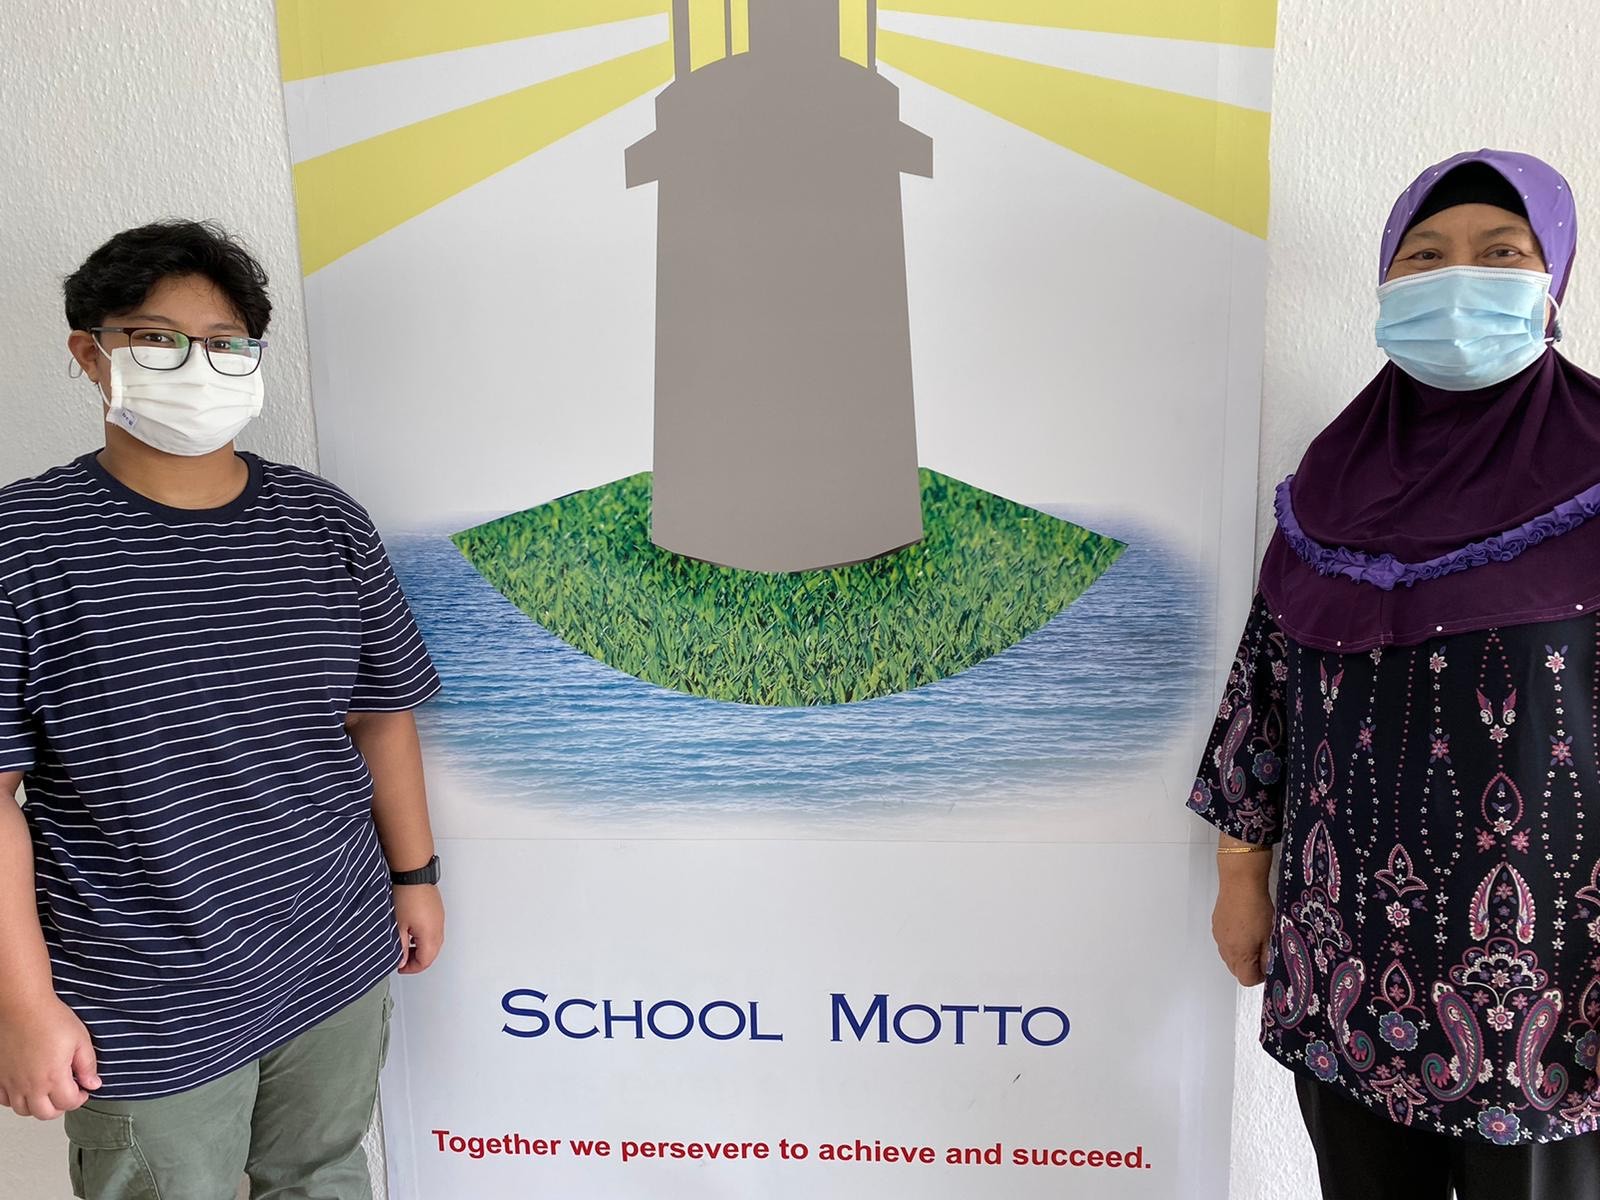 Mrs Ismail Noraini (right) and Ummi Yasserah (left) at Lighthouse School. (Photo taken in strict accordance with safety and hygiene guidelines.)